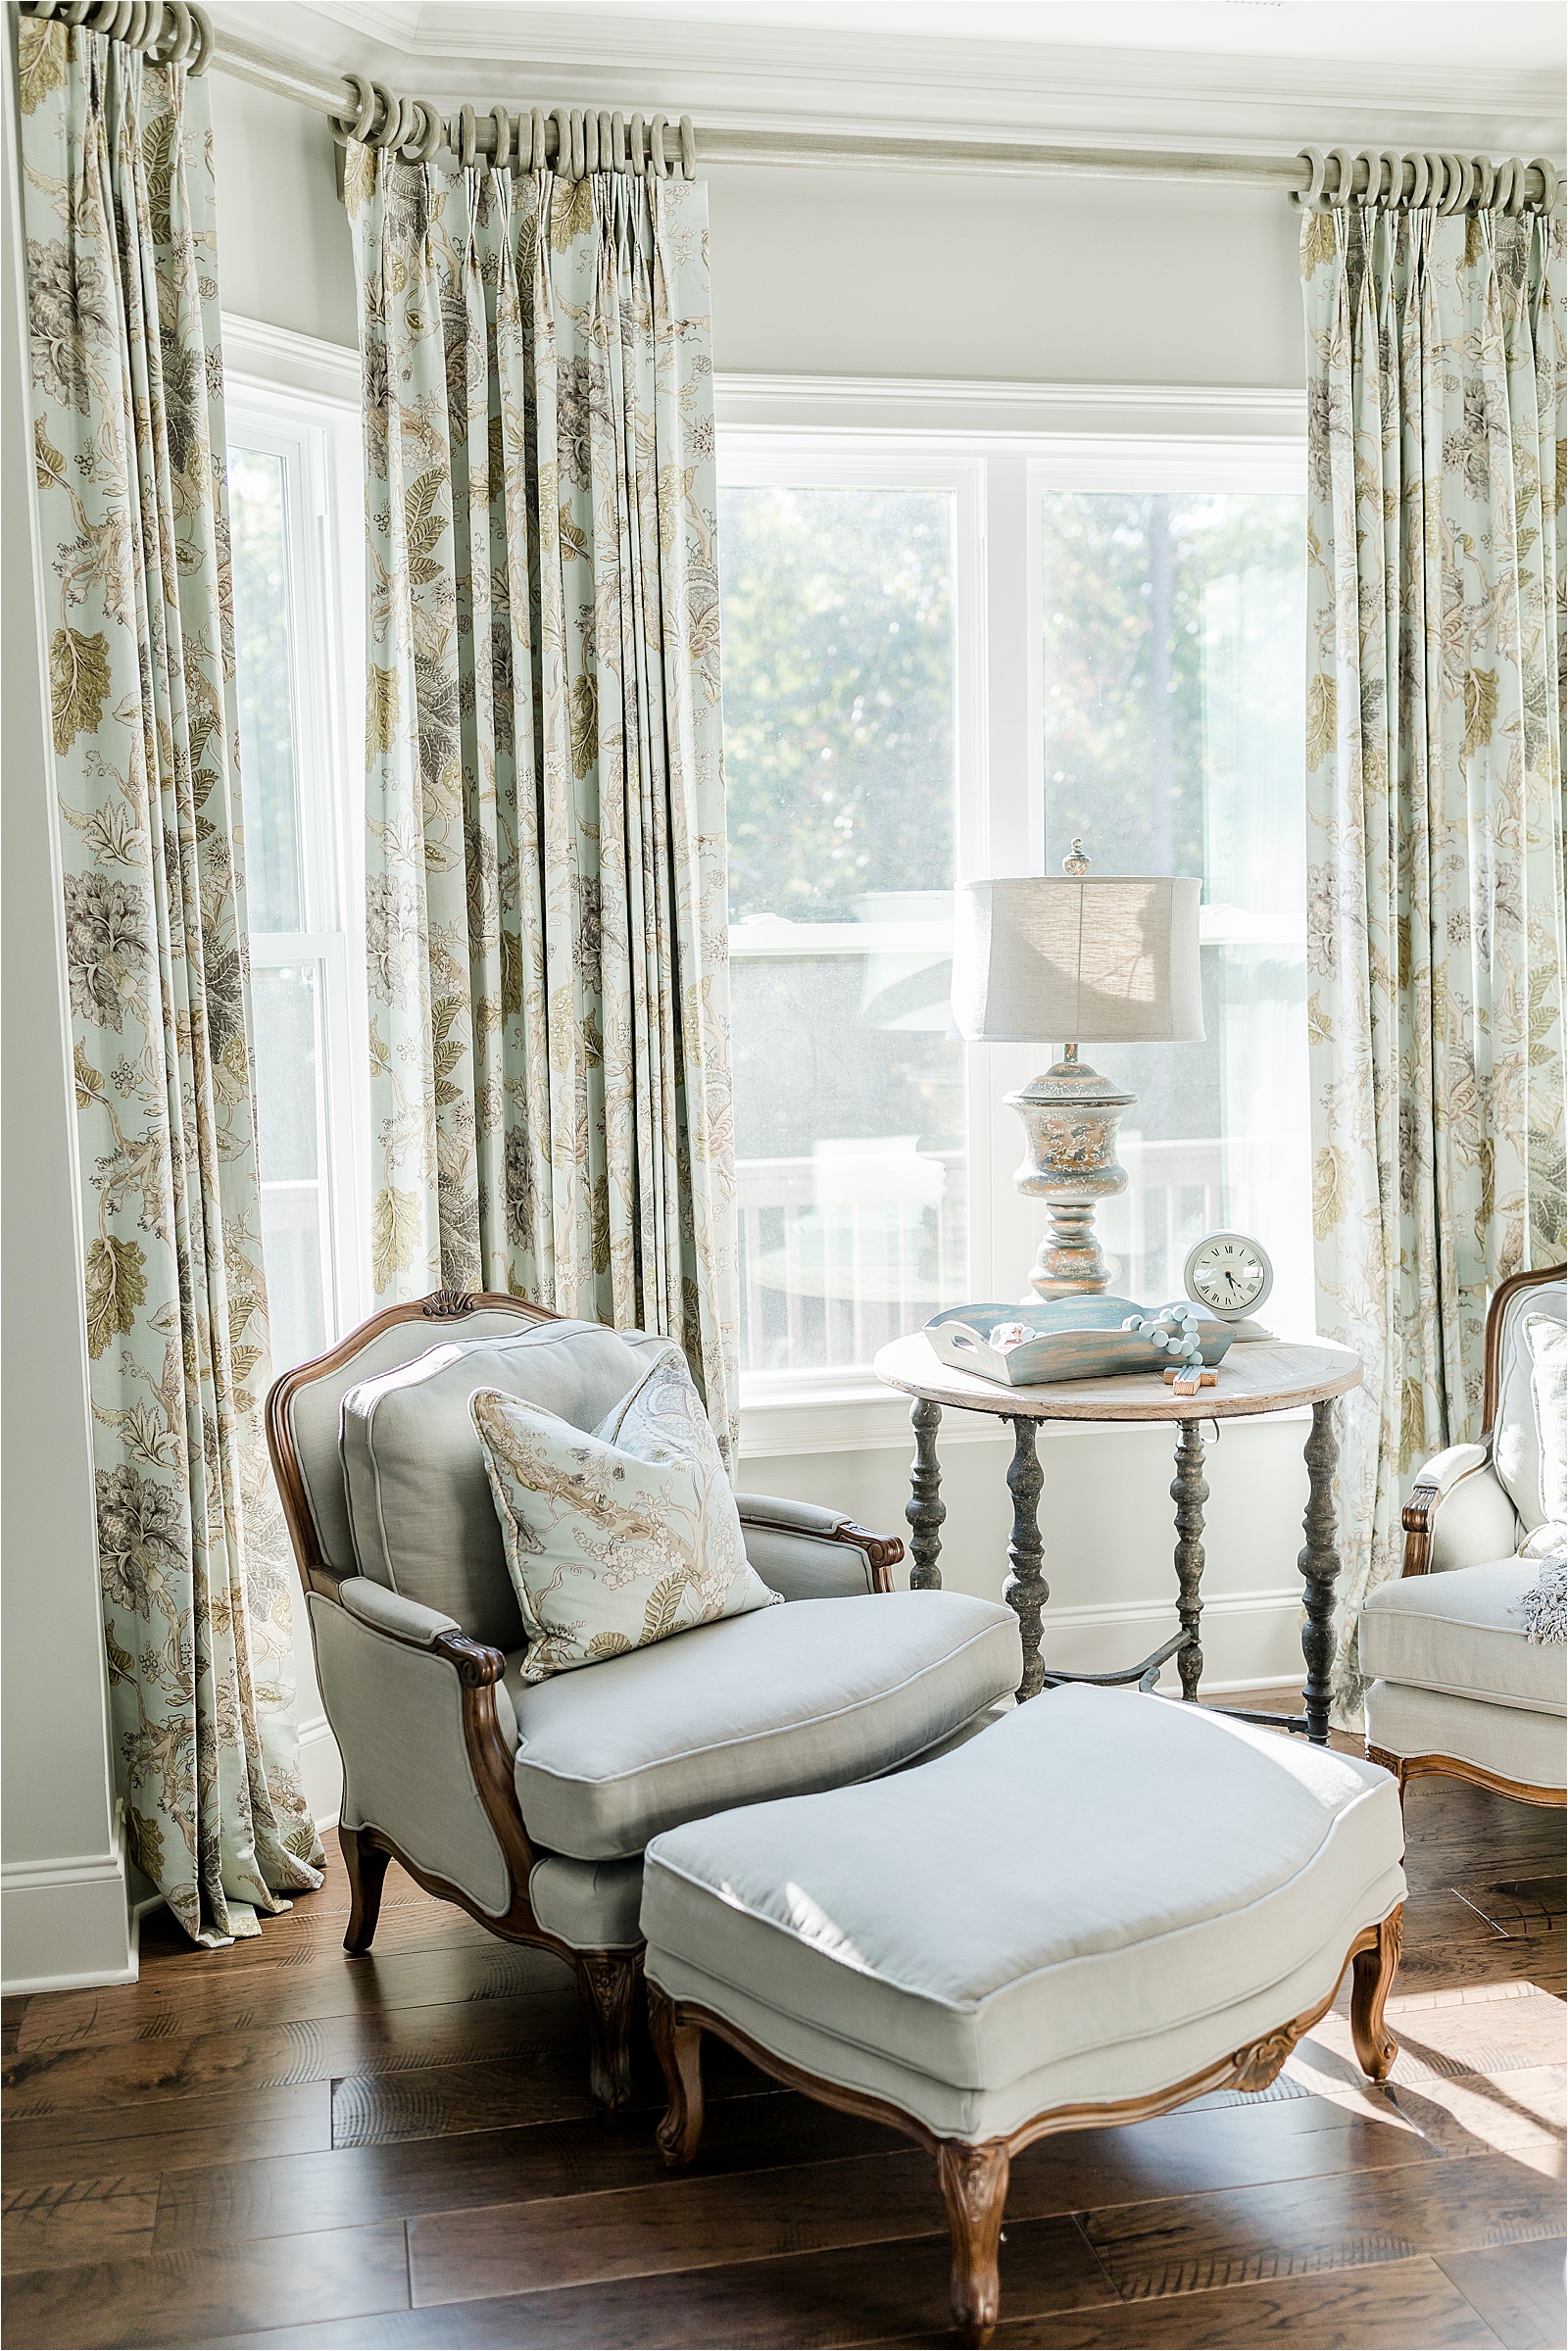 Chair and ottoman in from of large windows in a traditional master bedroom